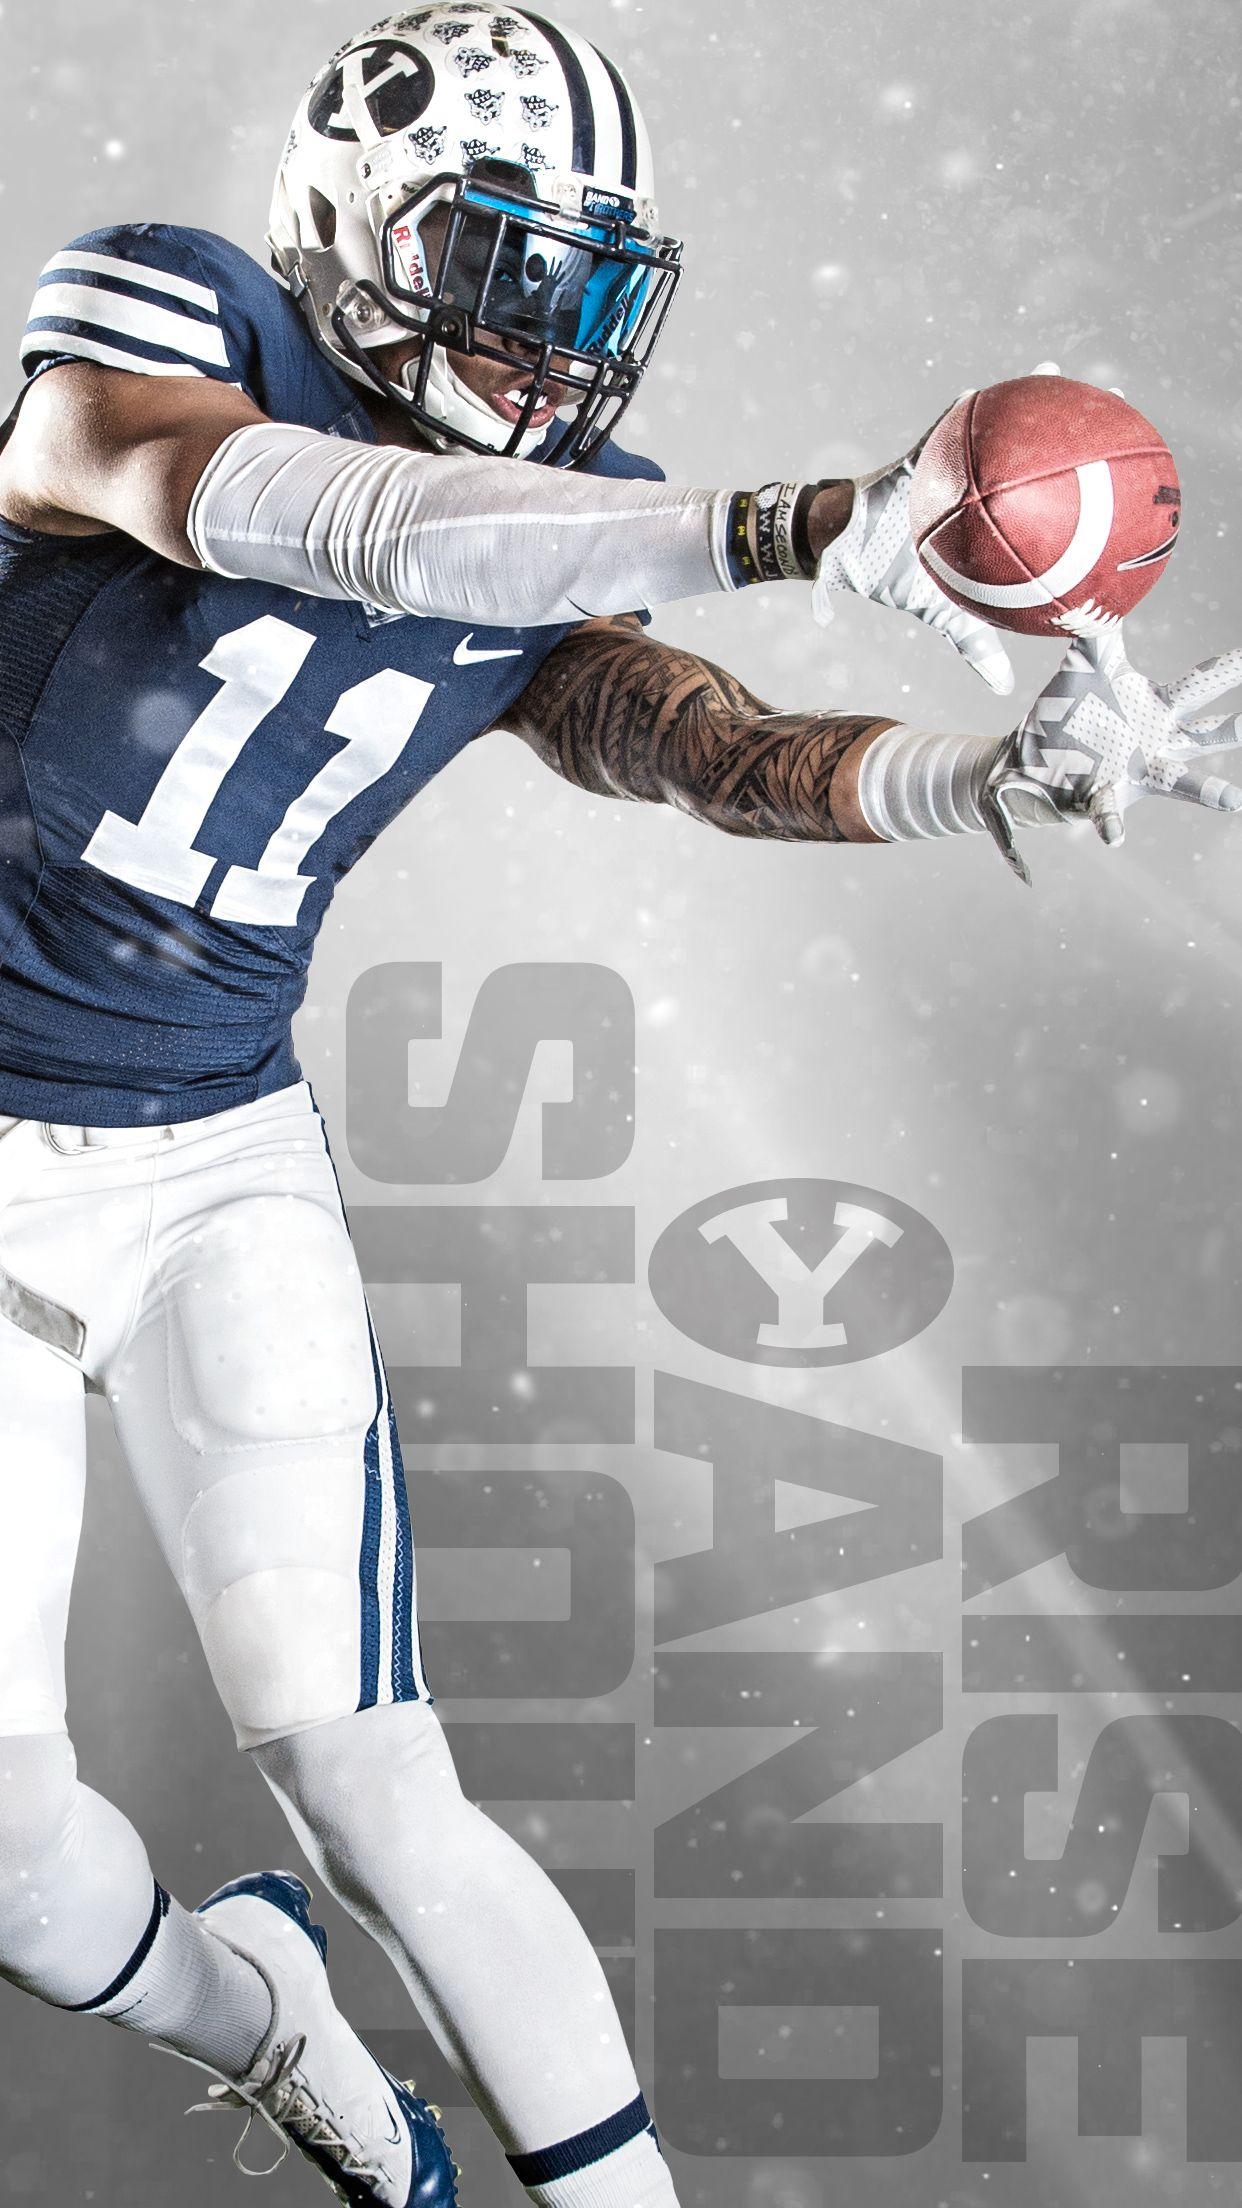 Byu Android Phone Wallpapers  Wallpaper Cave